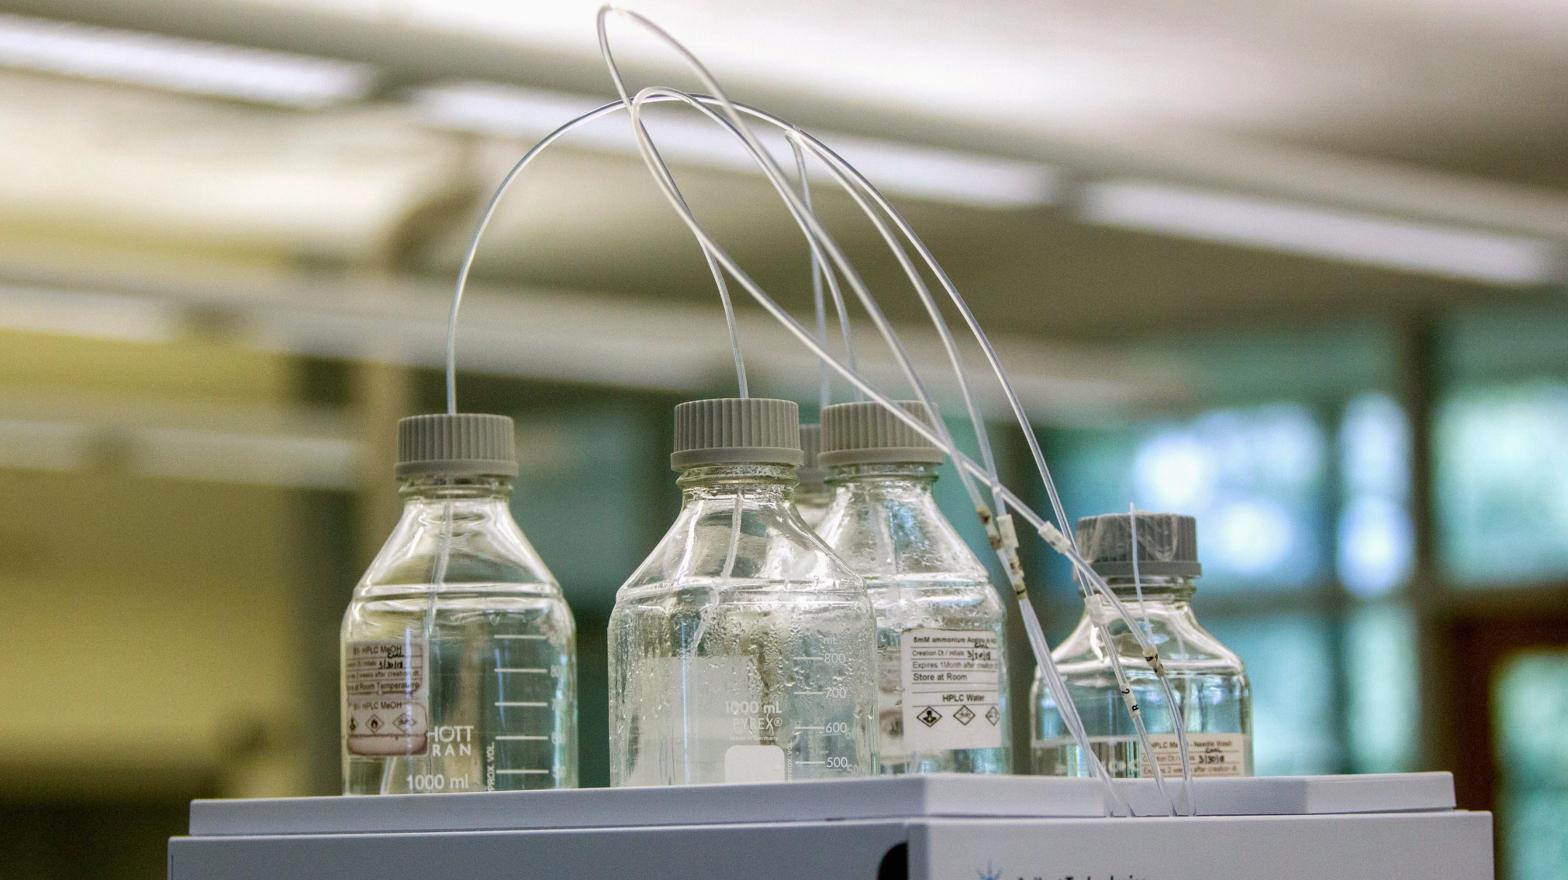 Equipment used to test for perfluoroalkyl and polyfluoroalkyl substances, aka PFAS, in drinking water at Trident Laboratories in Holland, Michigan in 2018.  (Photo: Cory Morse/The Grand Rapids Press via AP, AP)